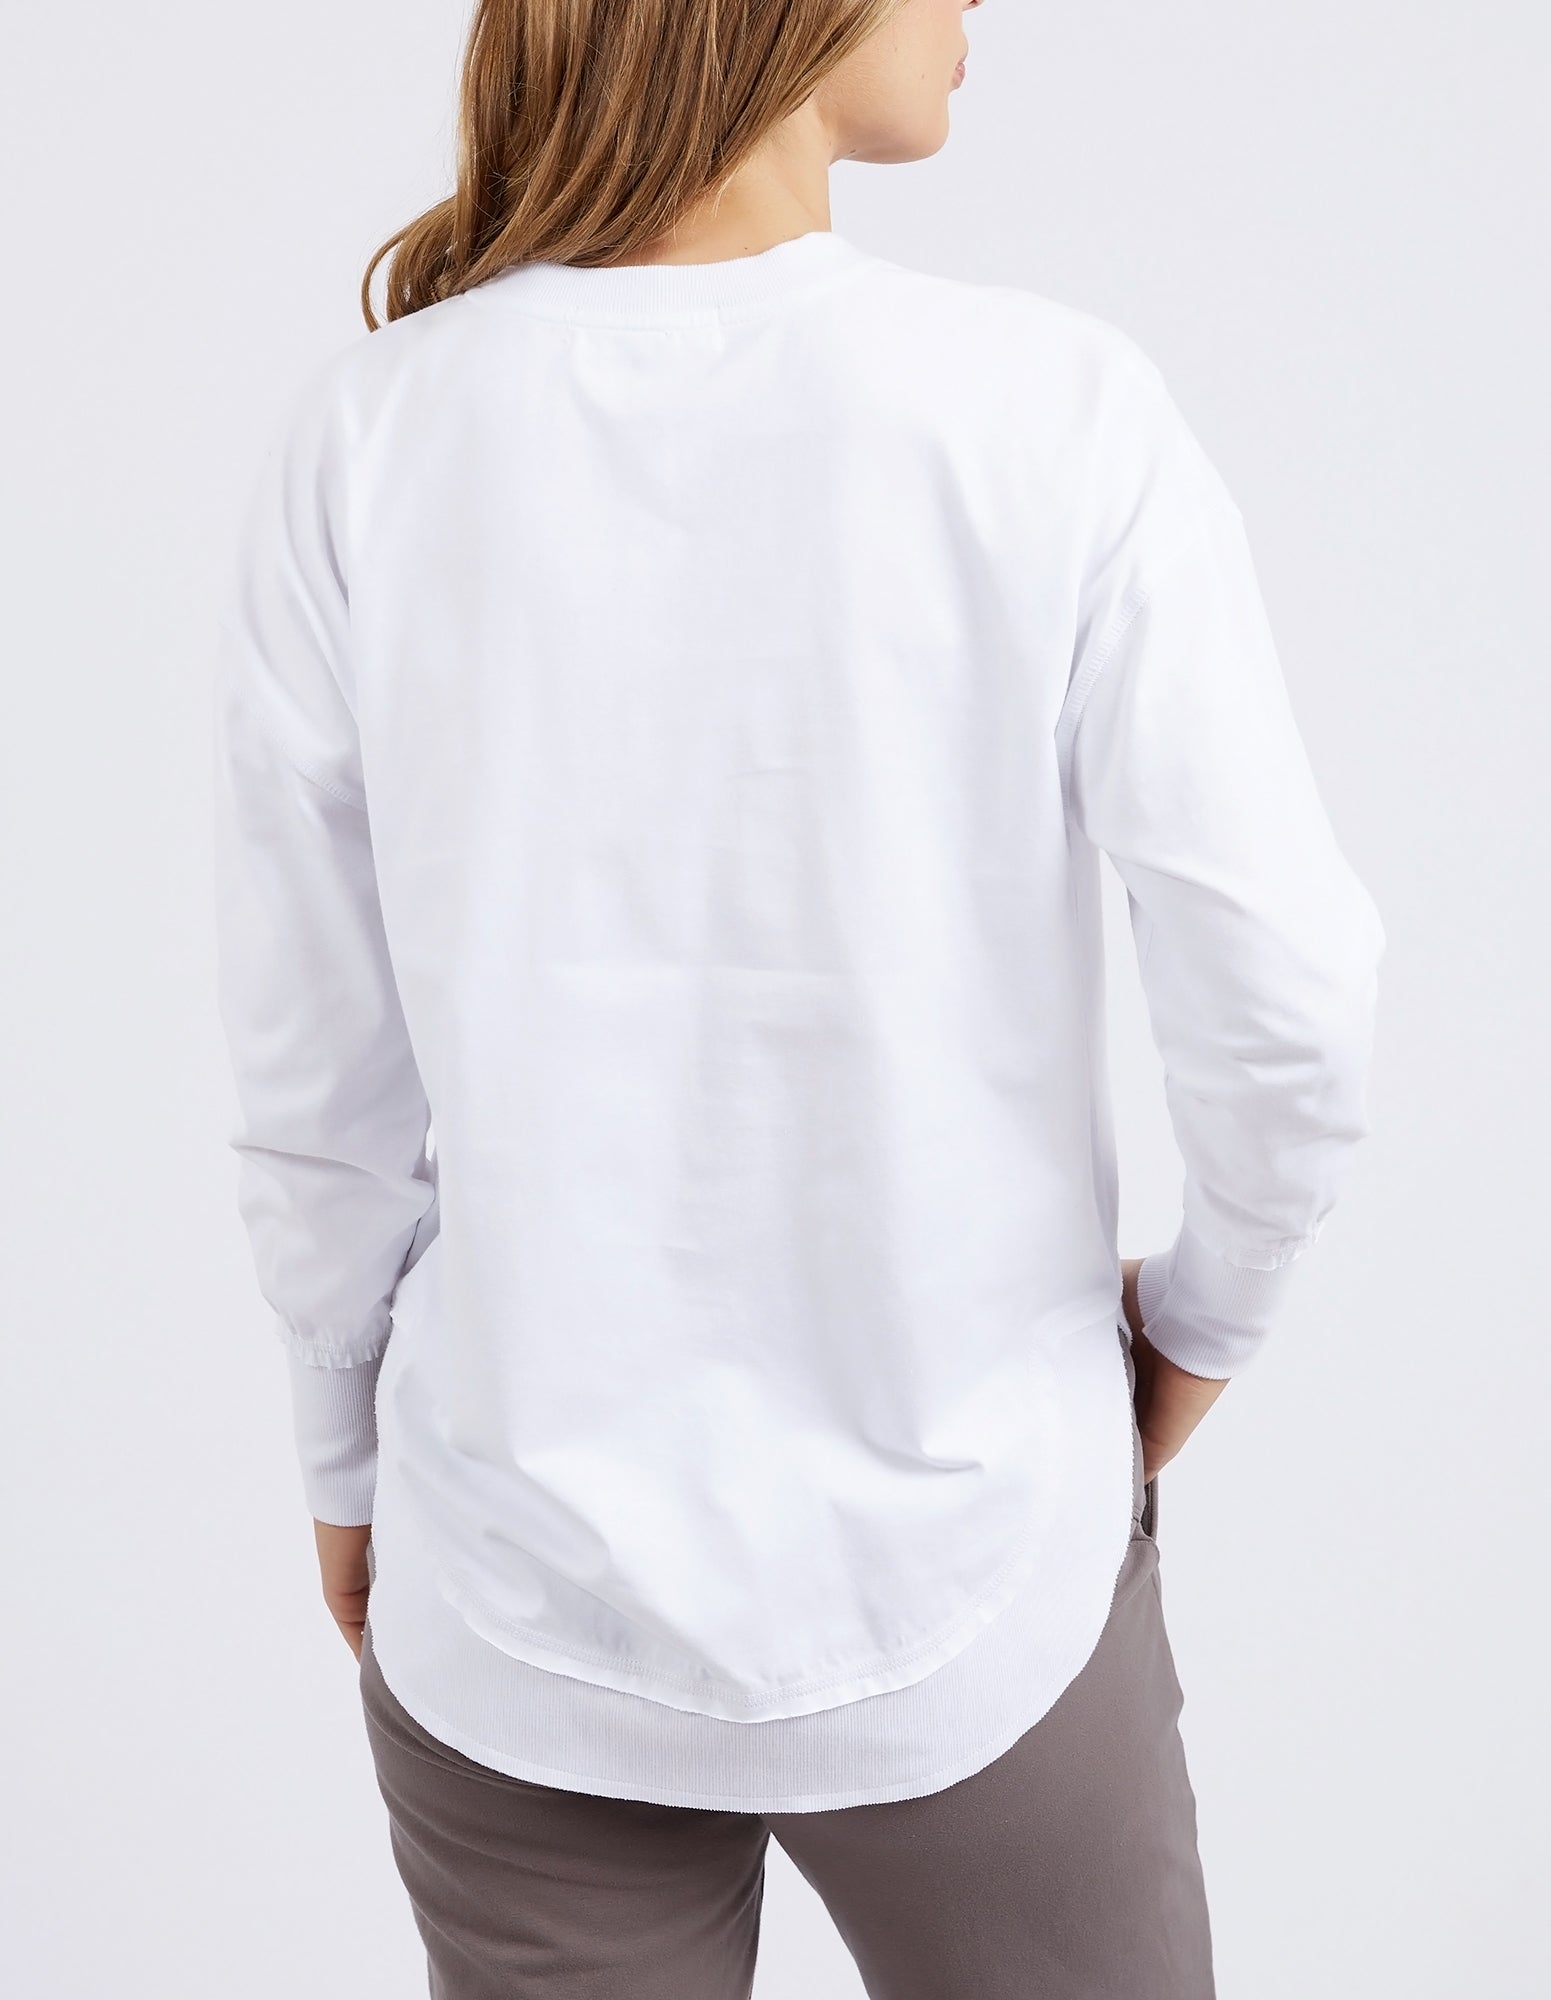 FOXWOOD FARRAH LONG SLEEVE TEE - WHITE - THE VOGUE STORE